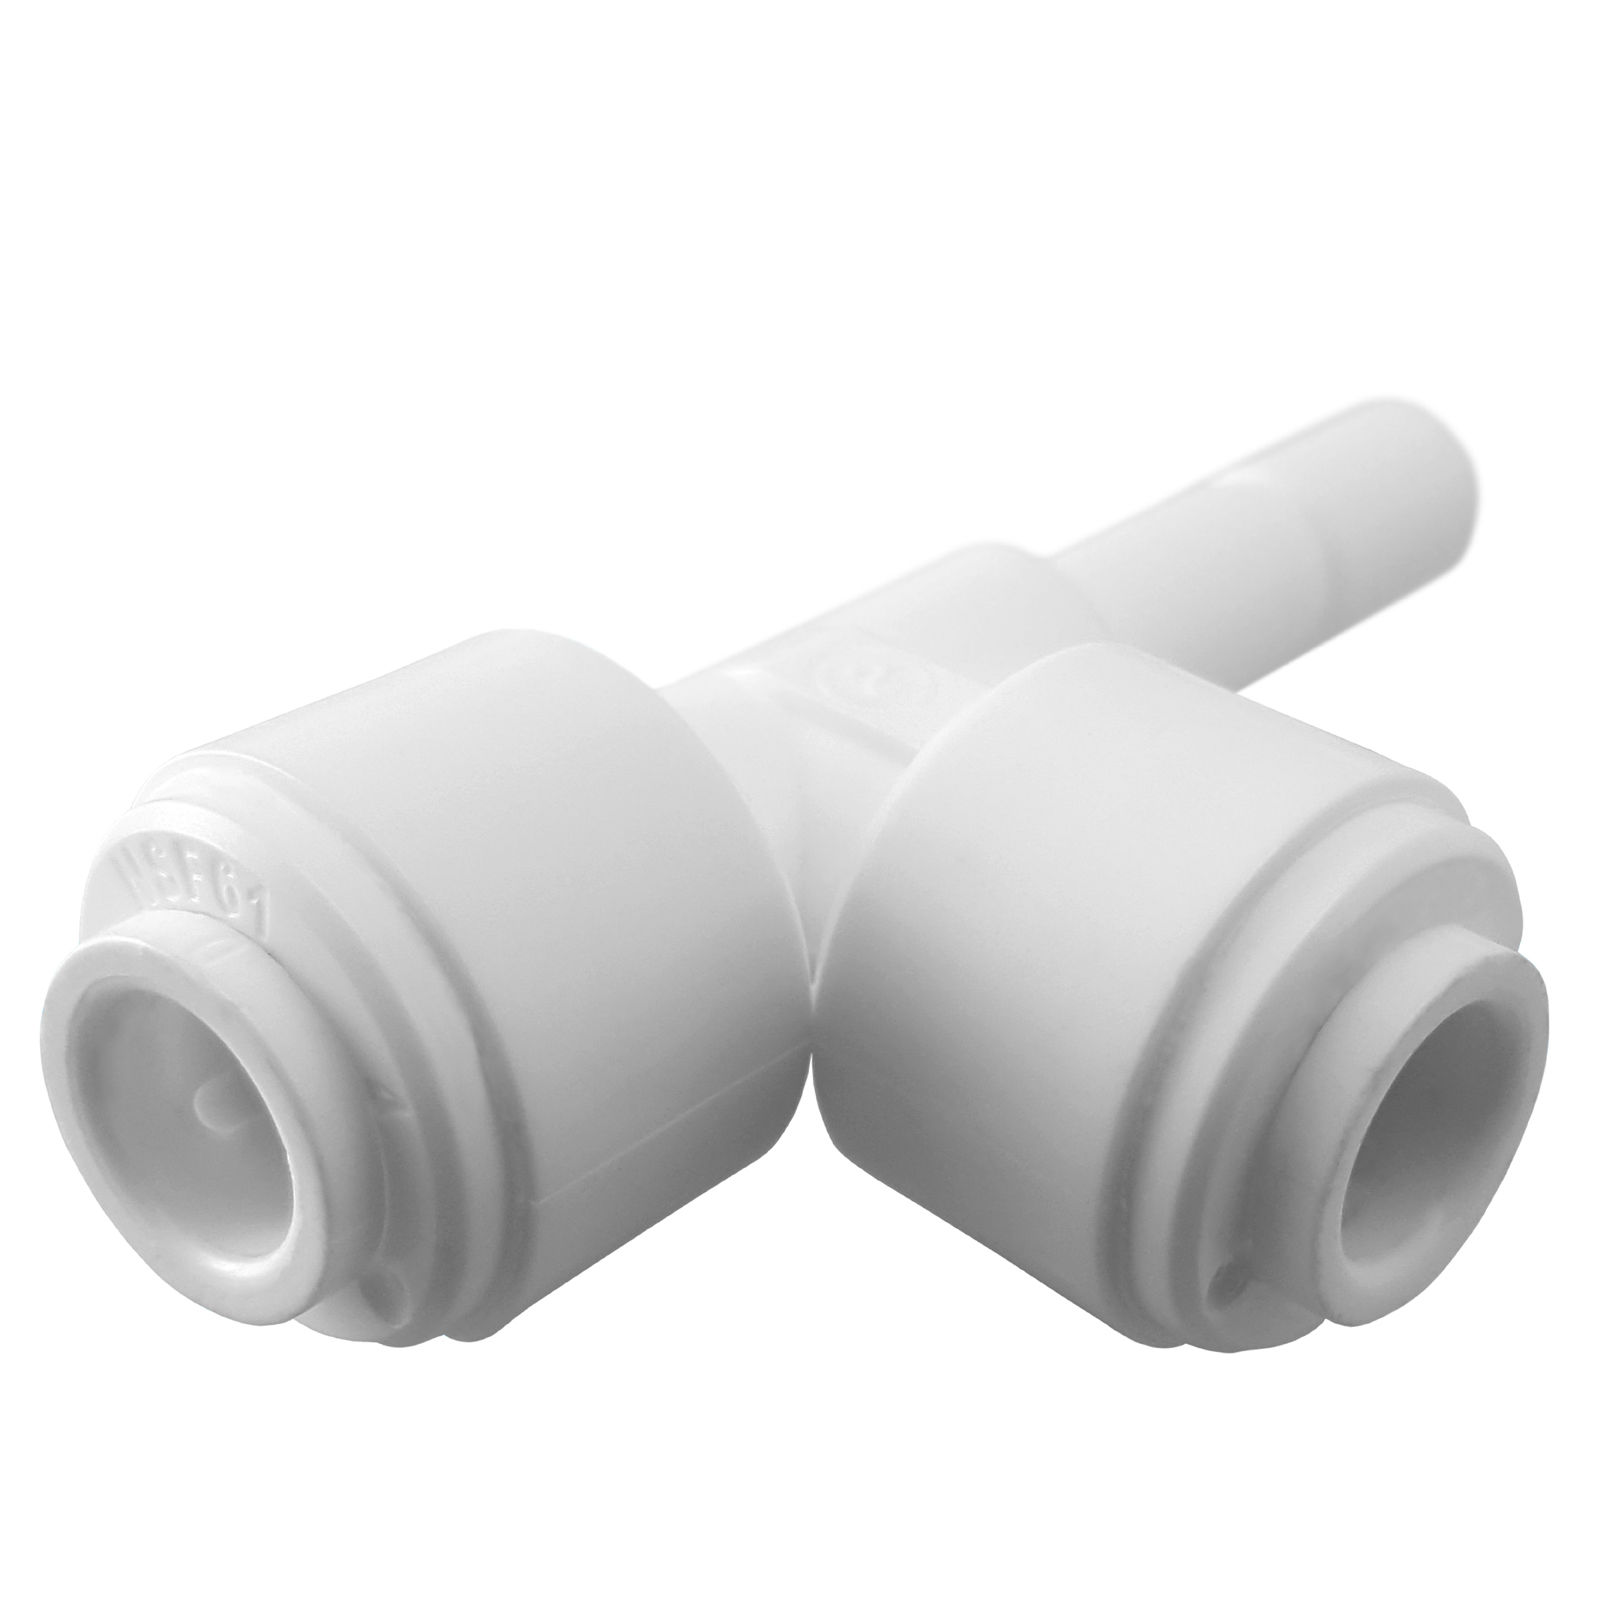 Stem Elbow 1//4/" Fitting Connection Parts for Water Filters RO System